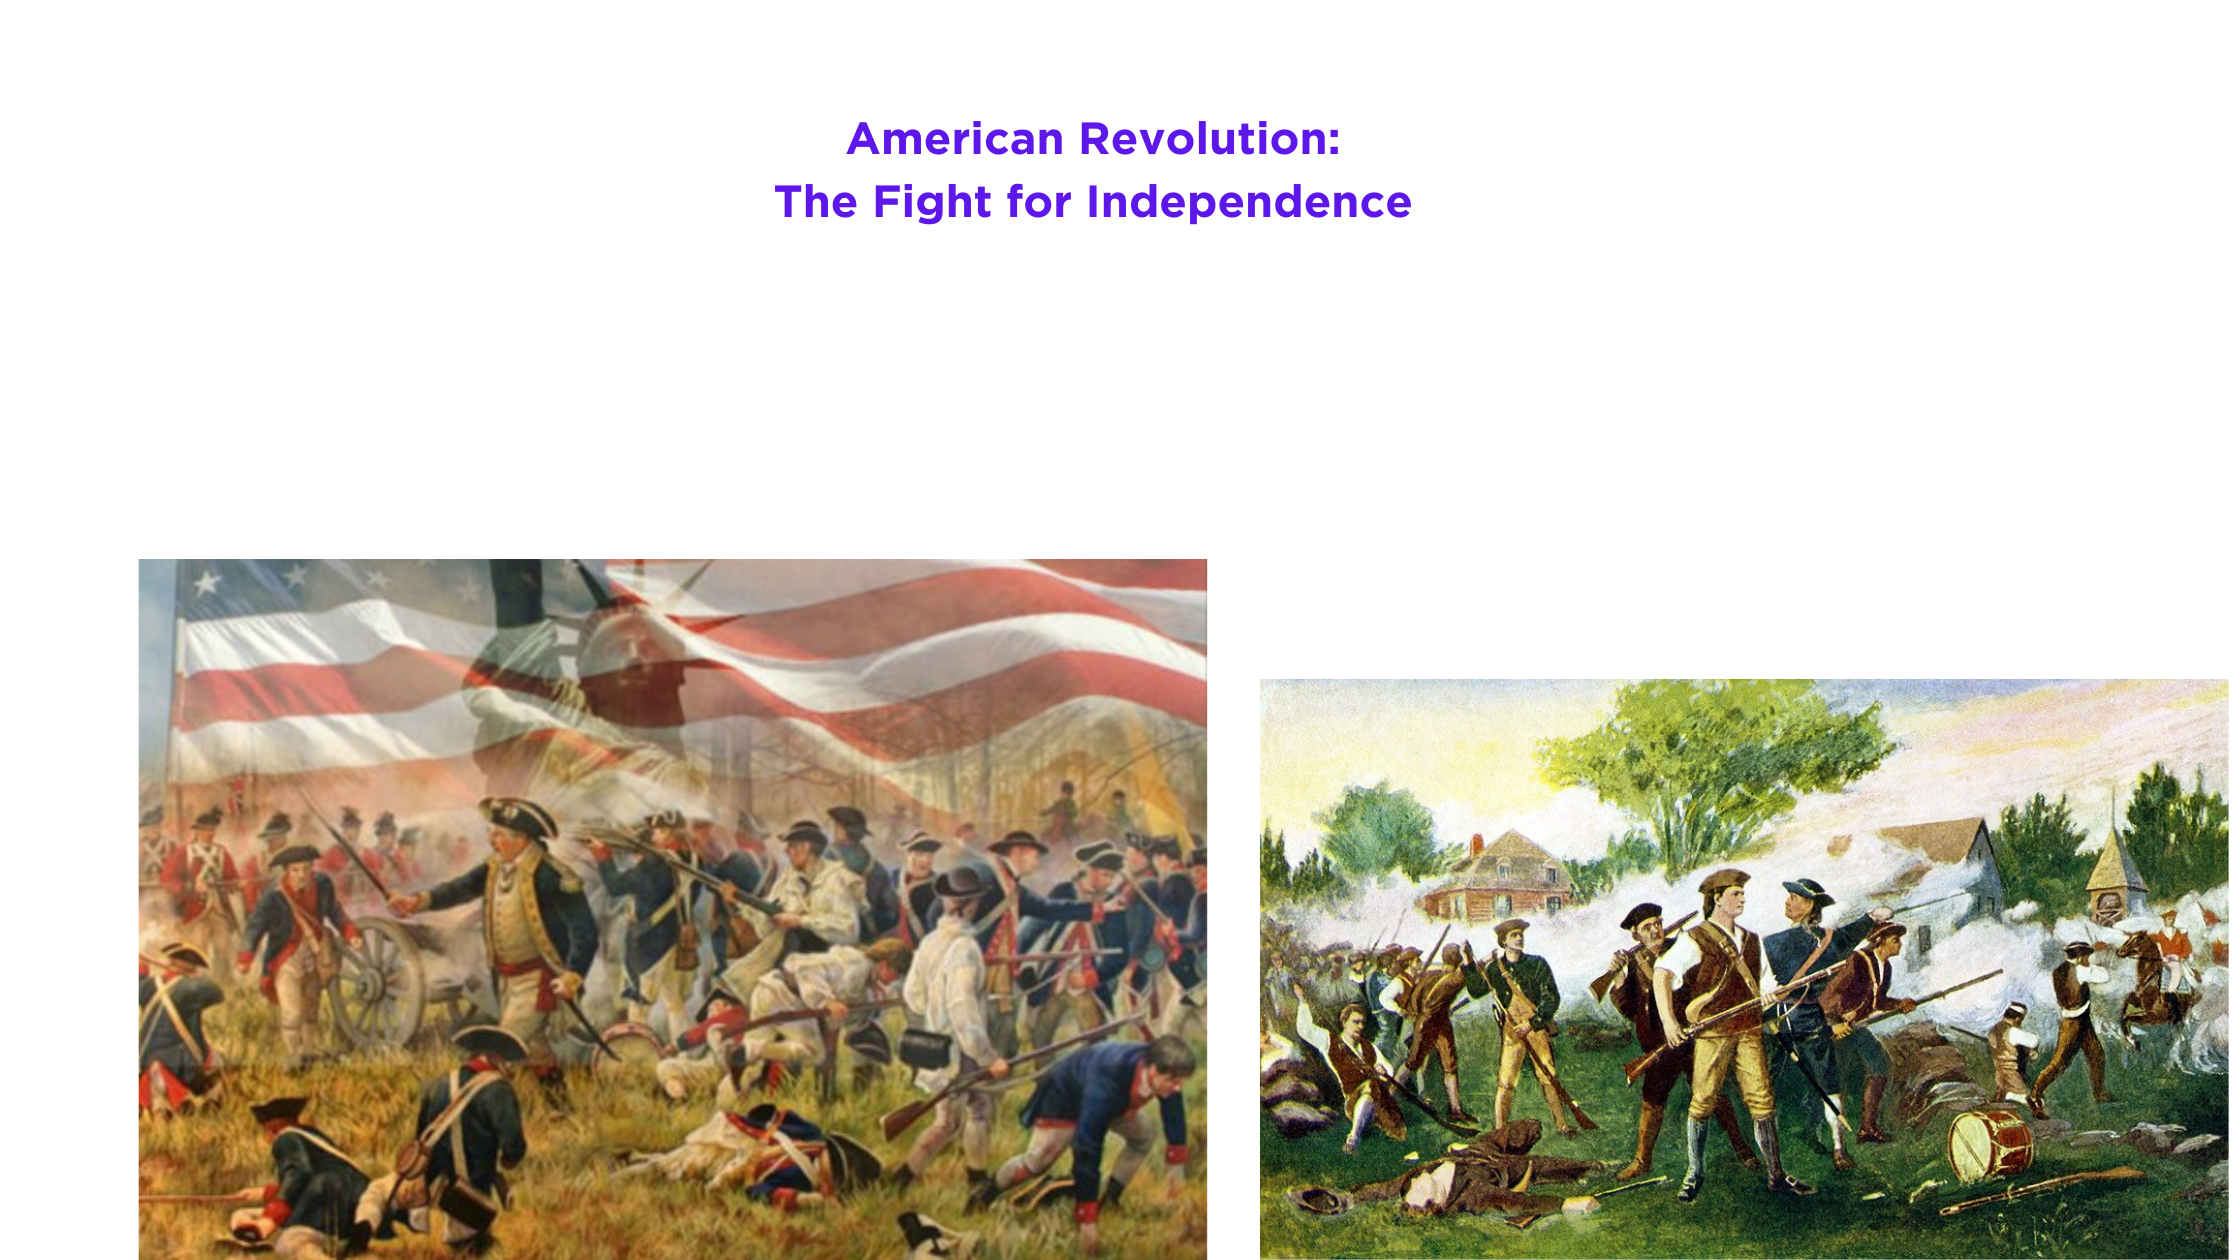 American Revolution: The Fight for Independence